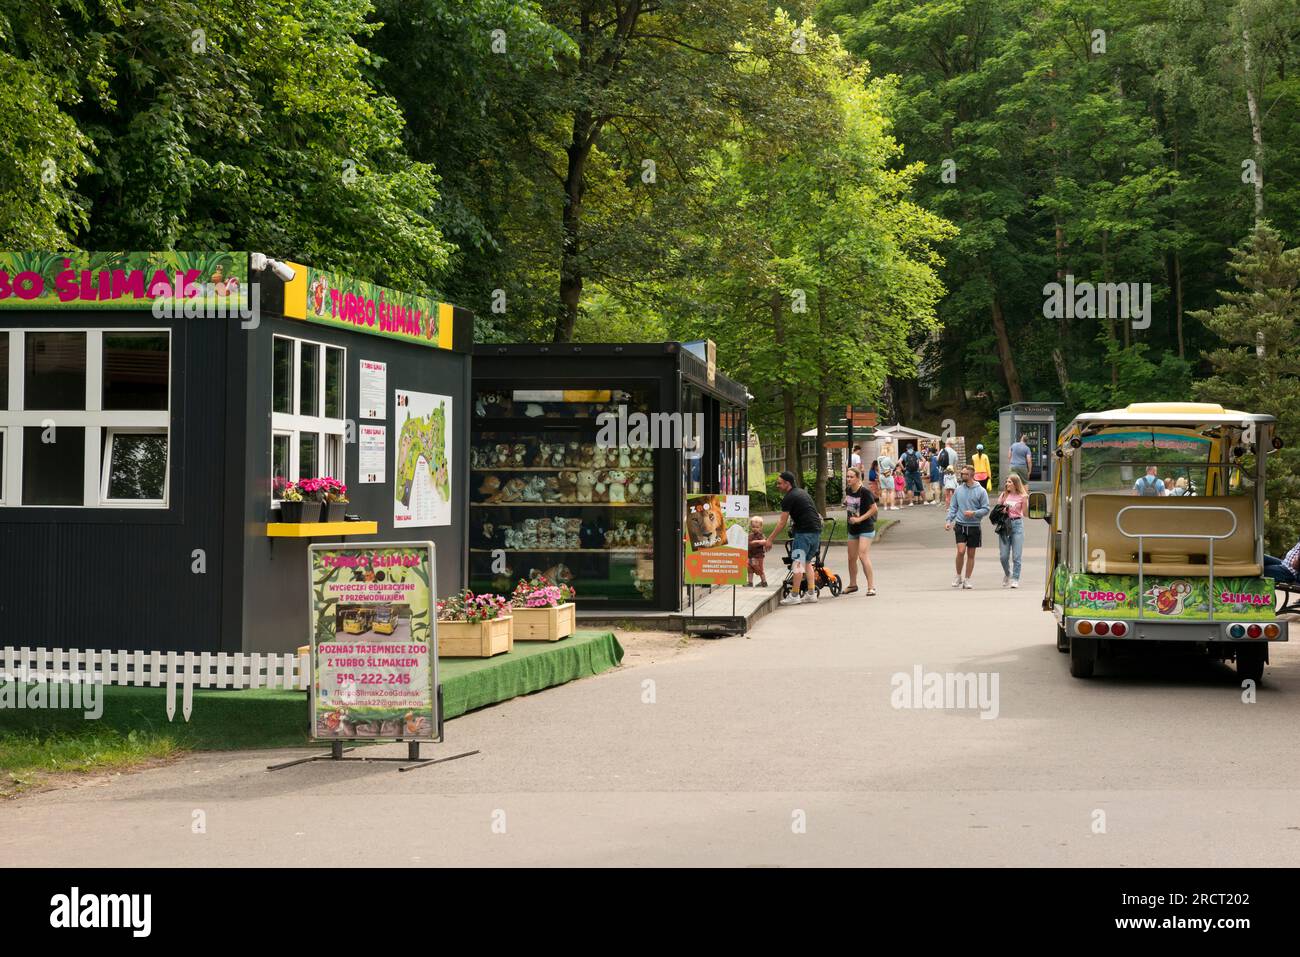 Souvenirs and gift shops in the Gdansk Zoo, Gdansk, Pomerania, Poland, Europe, EU Stock Photo